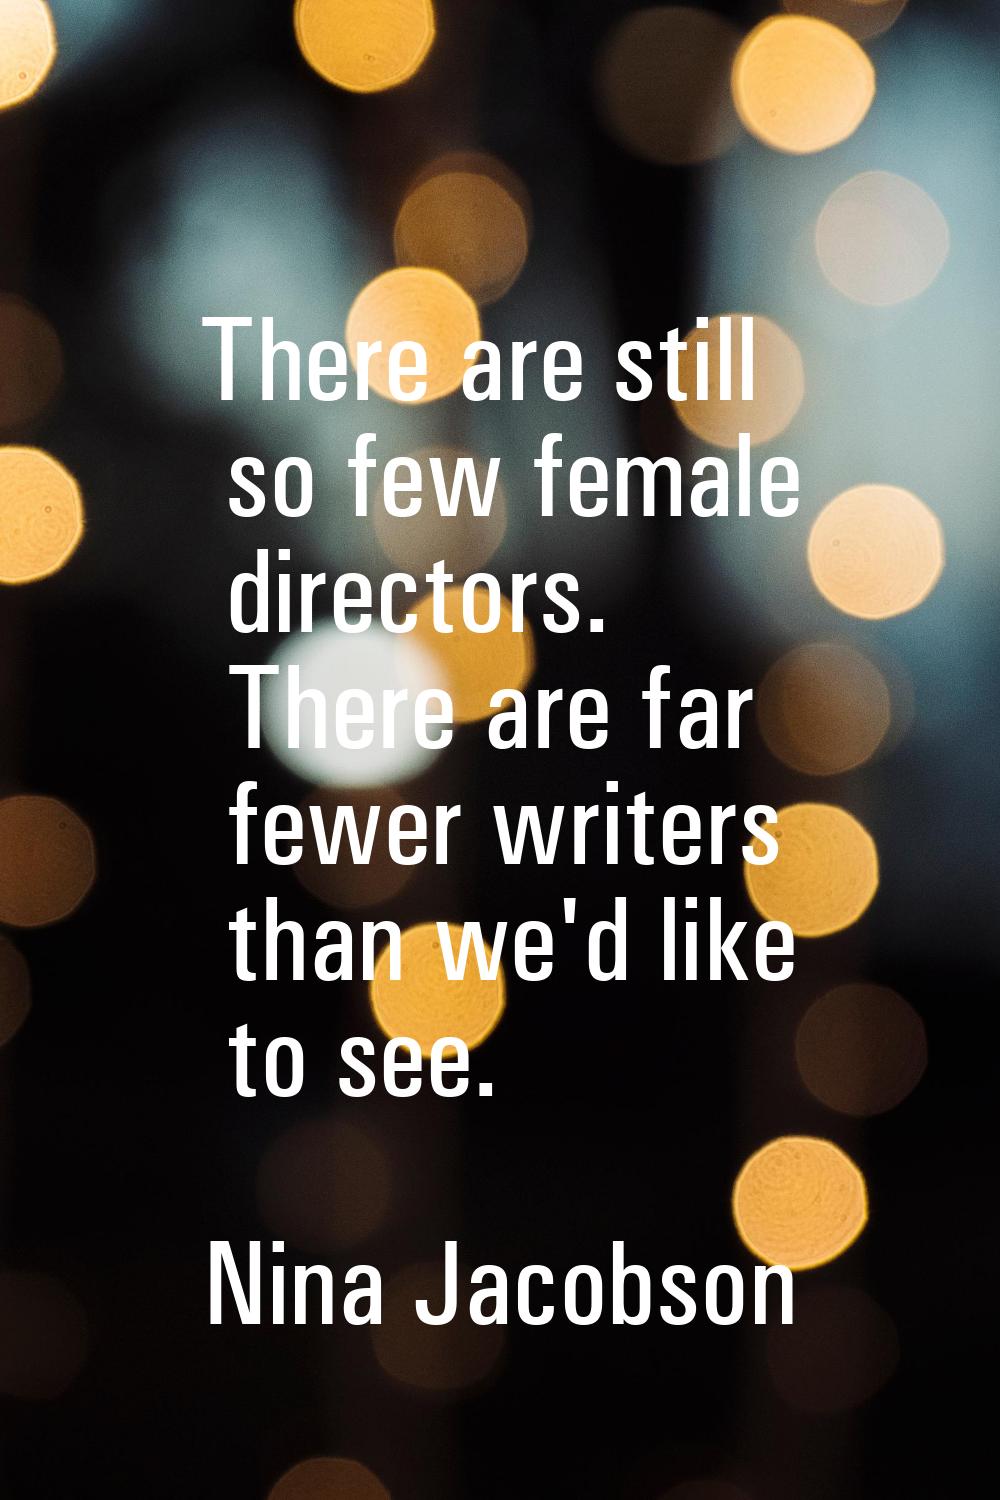 There are still so few female directors. There are far fewer writers than we'd like to see.